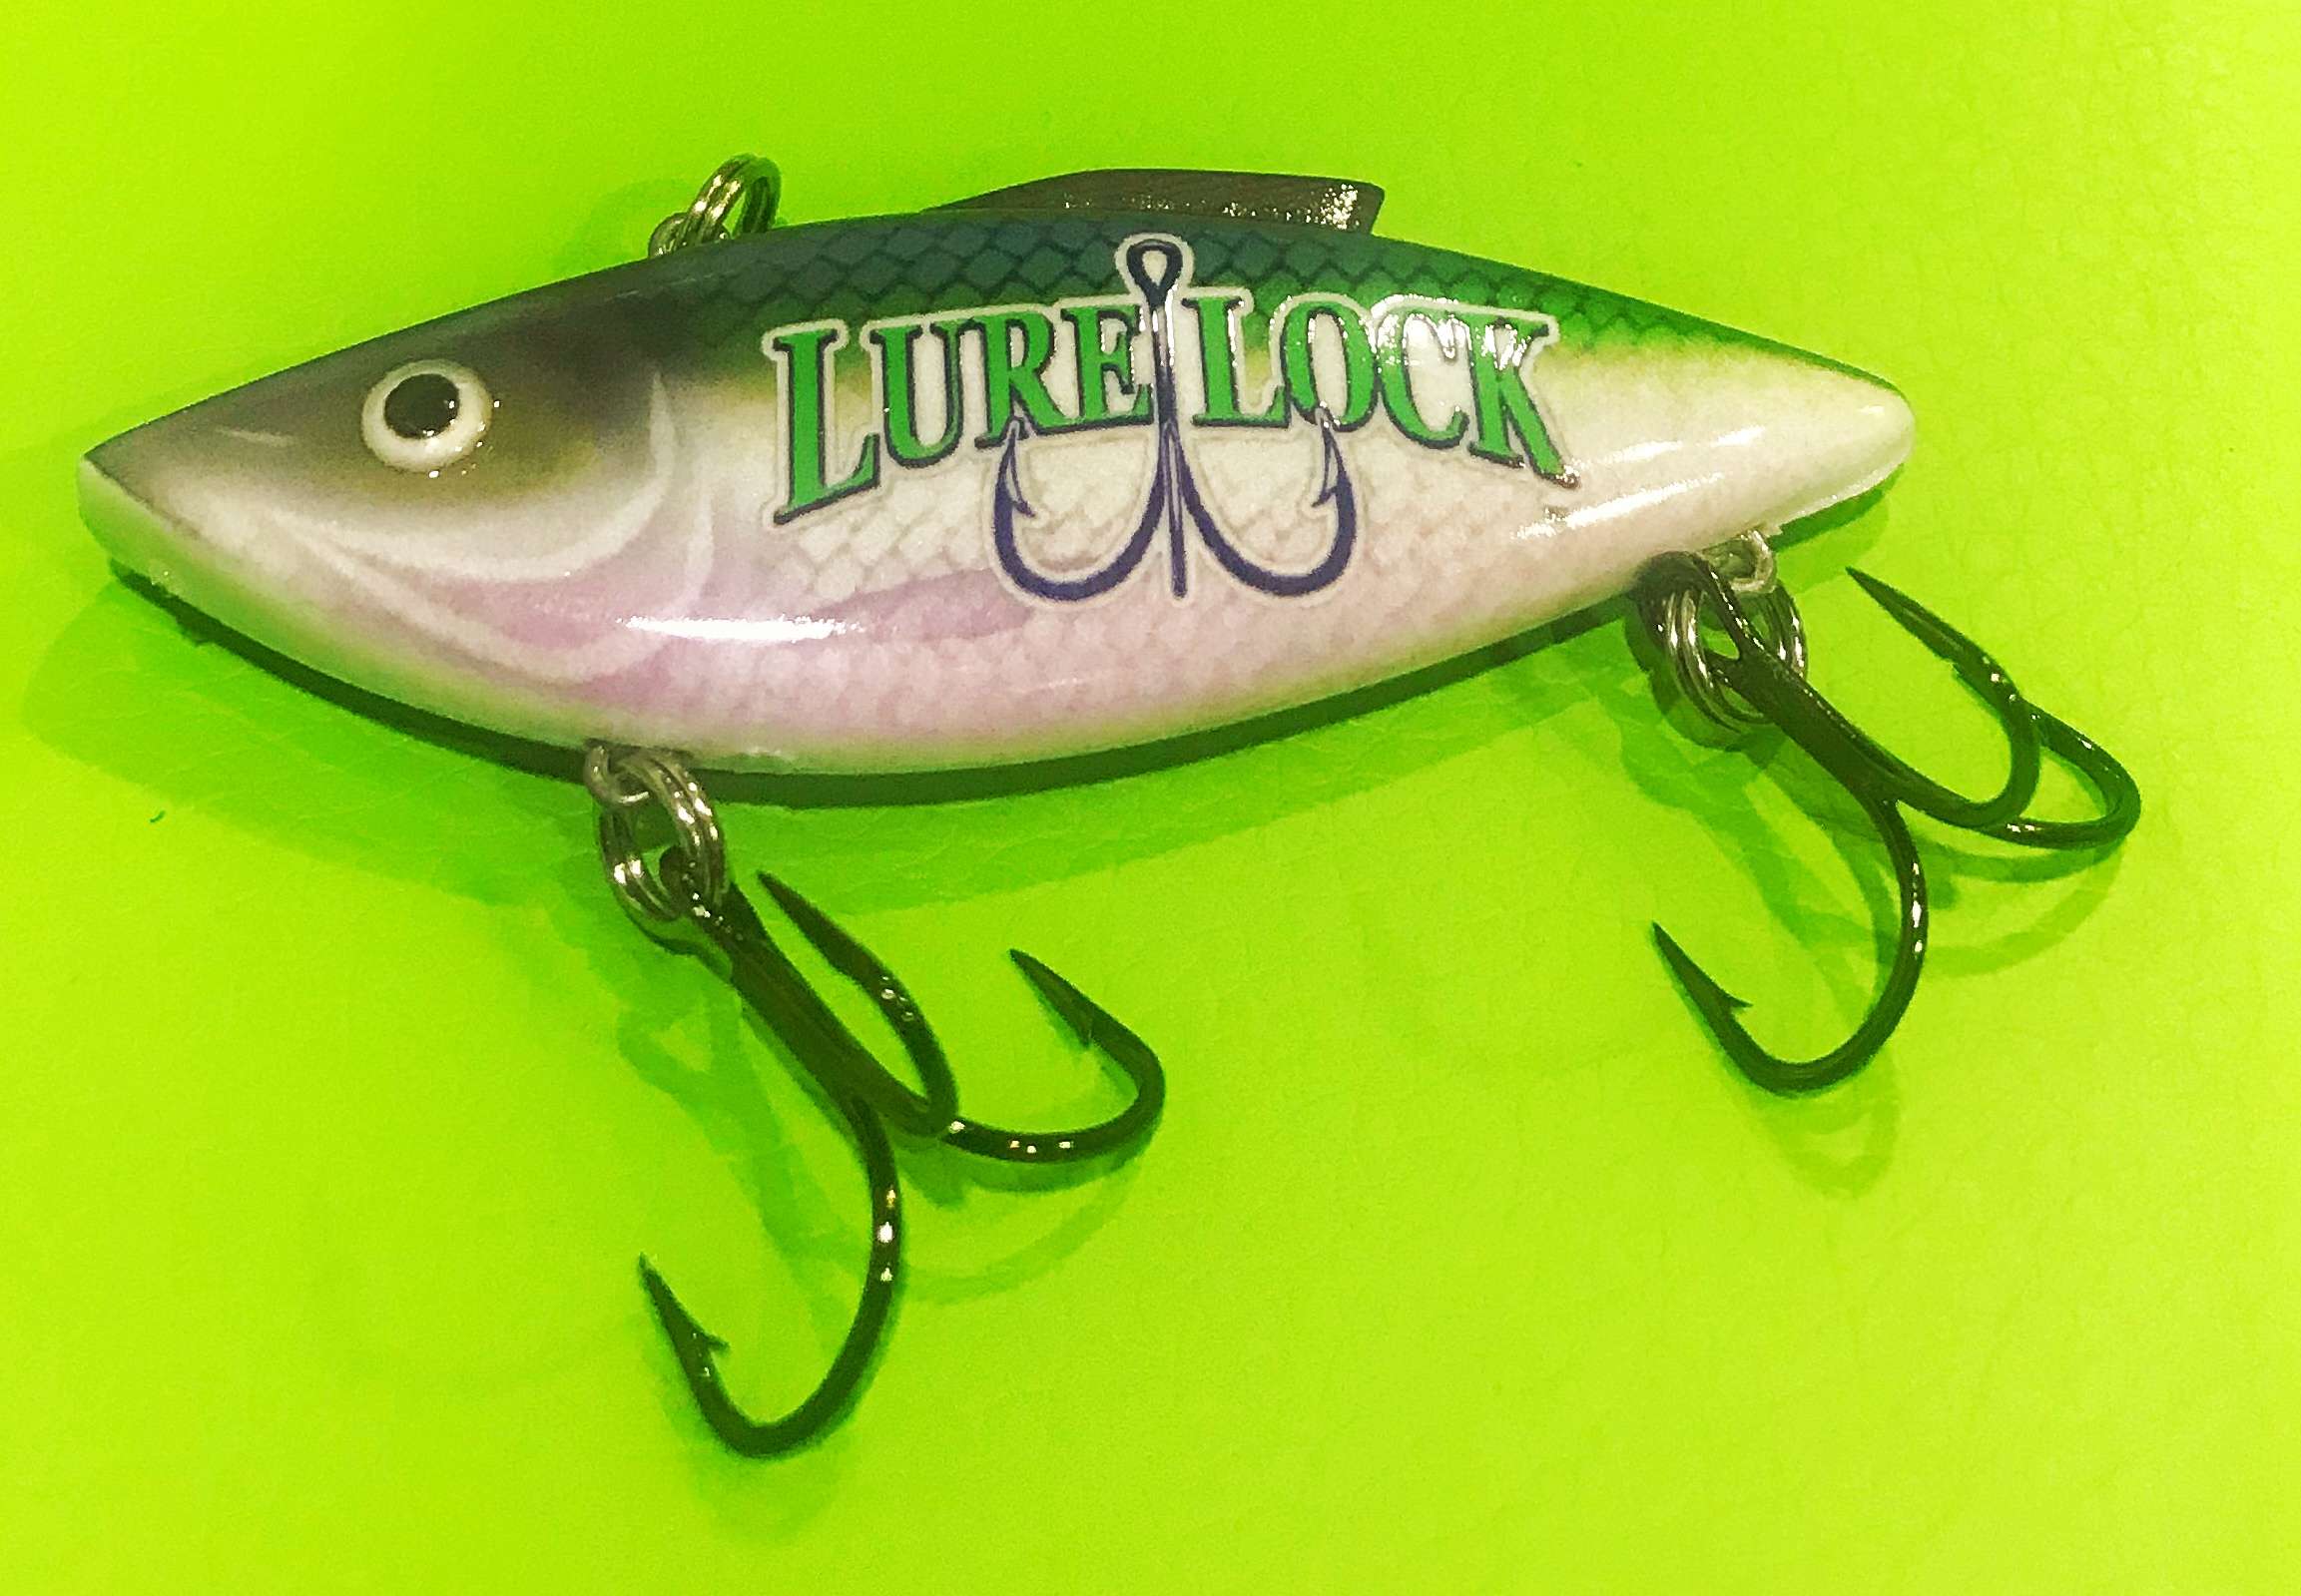 Lure Lock giving away Rat-L-Traps, chance to fish with Matt Lee - Bassmaster